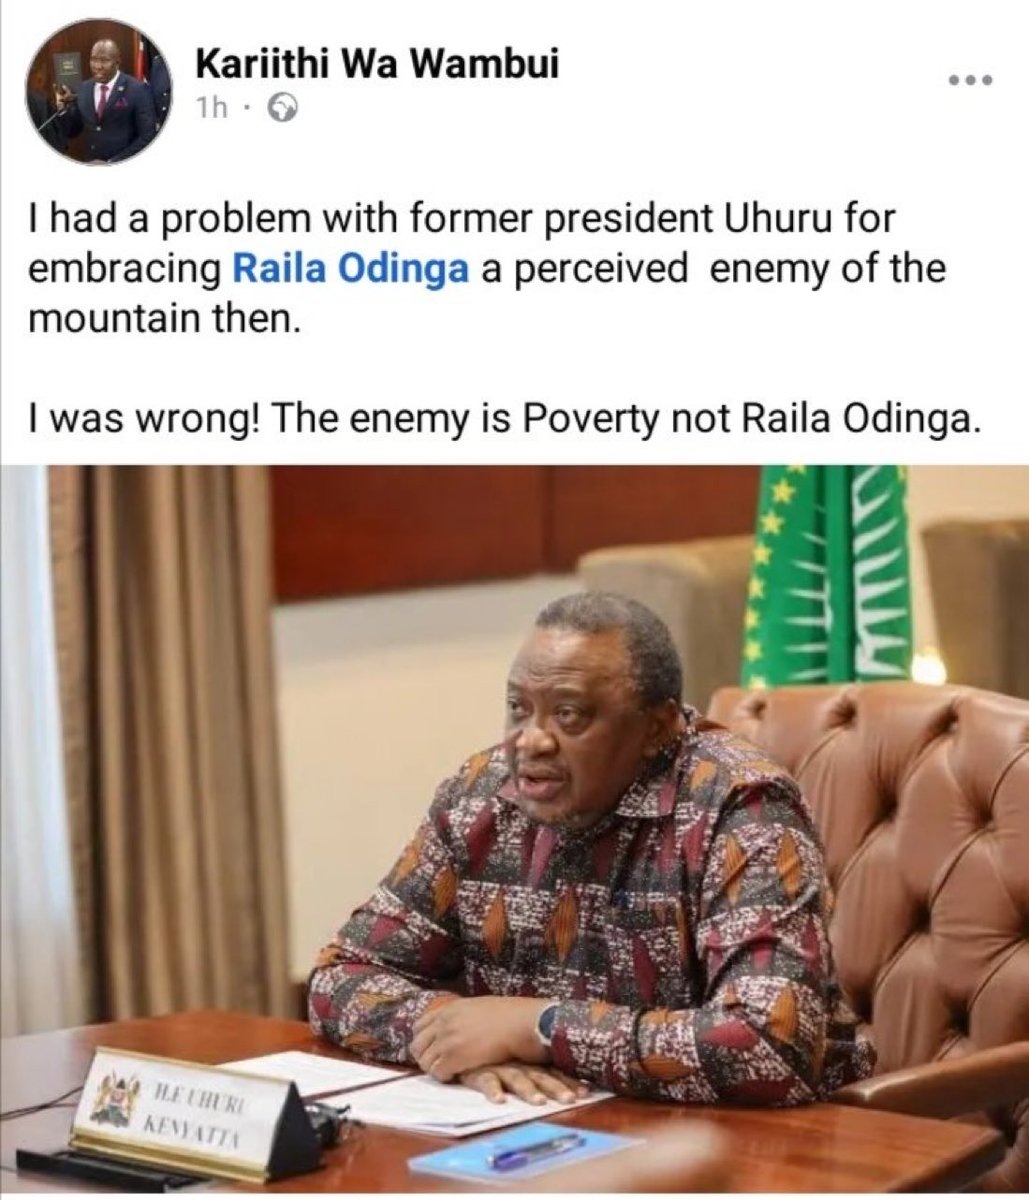 This is an elected MCA from Mathira who used his resources to remind his people of the Ichaweri oath that declared Raila the enemy. 

Just 2 years of Ruto's presidency has debunked that lie. Ruto finyaaaaaaaa😂